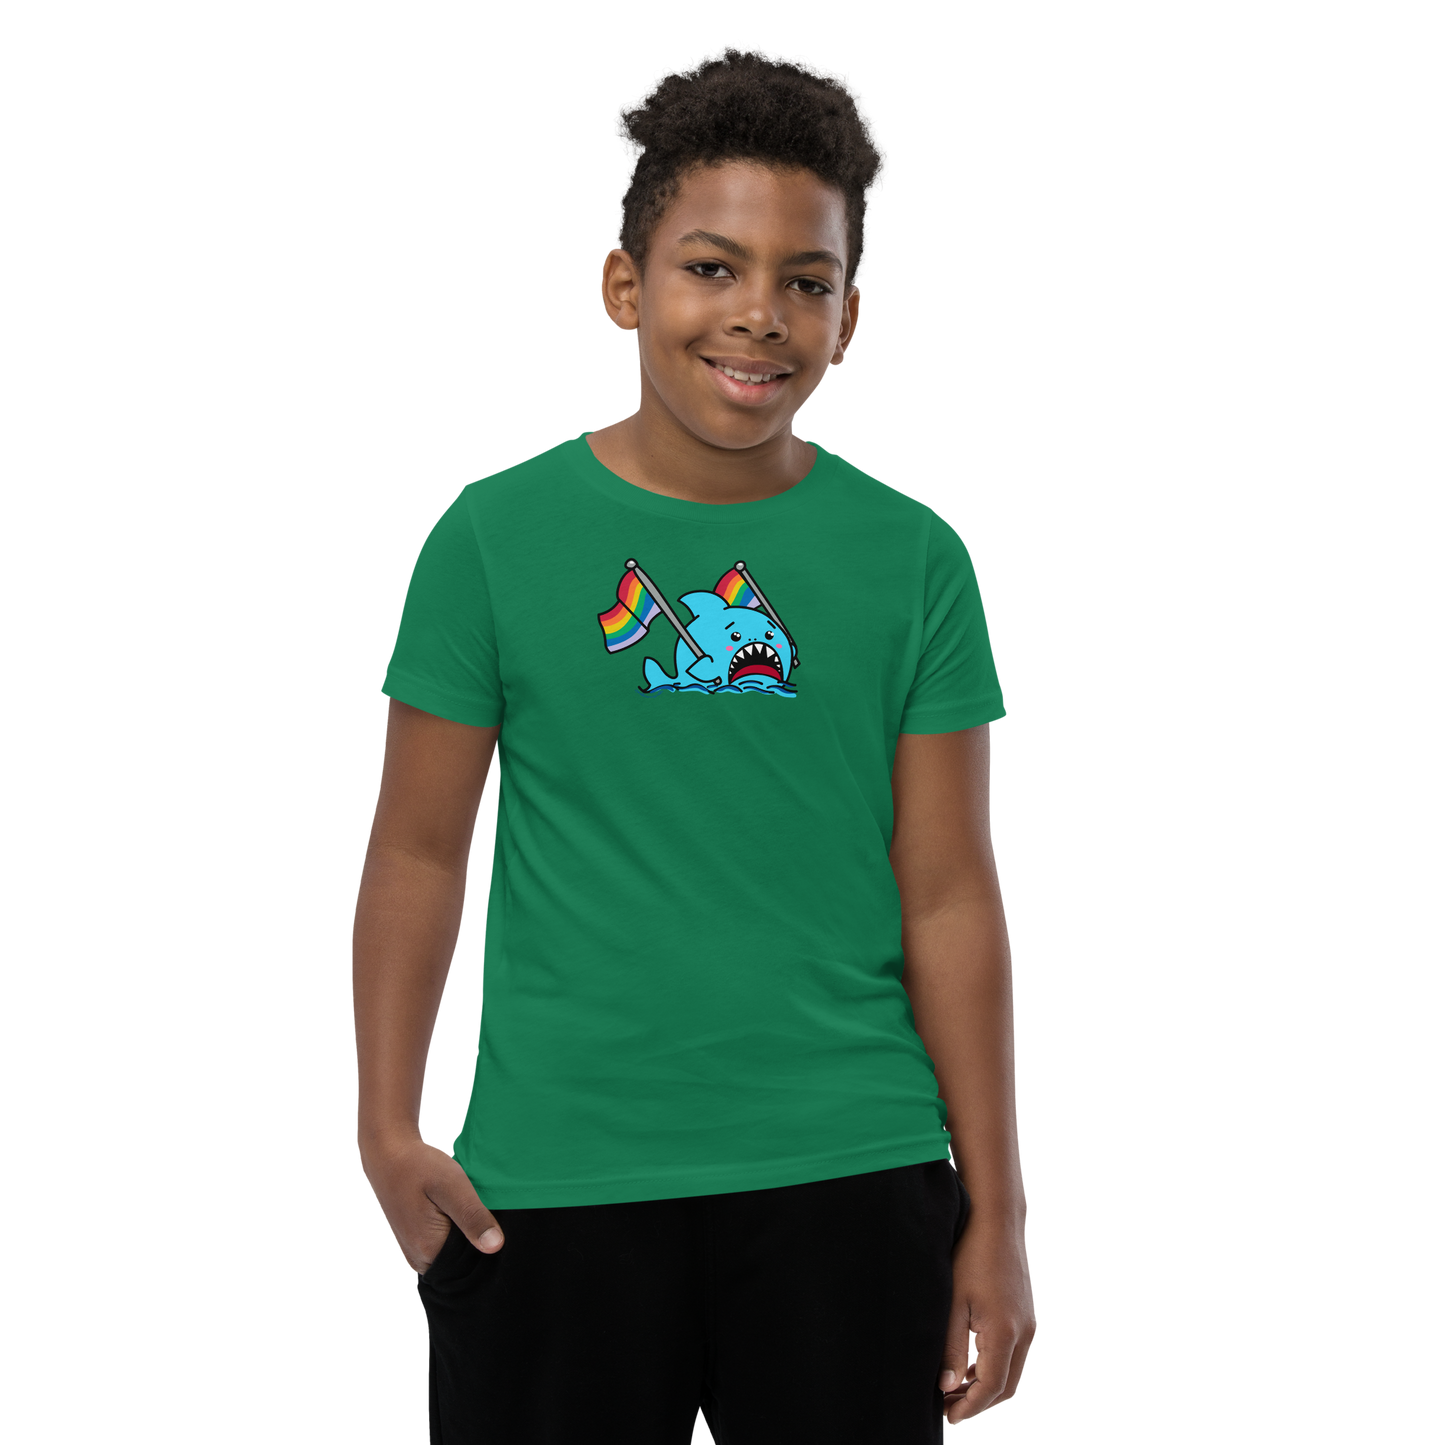 Anxious Shark Supports Pride- Youth Tshirt